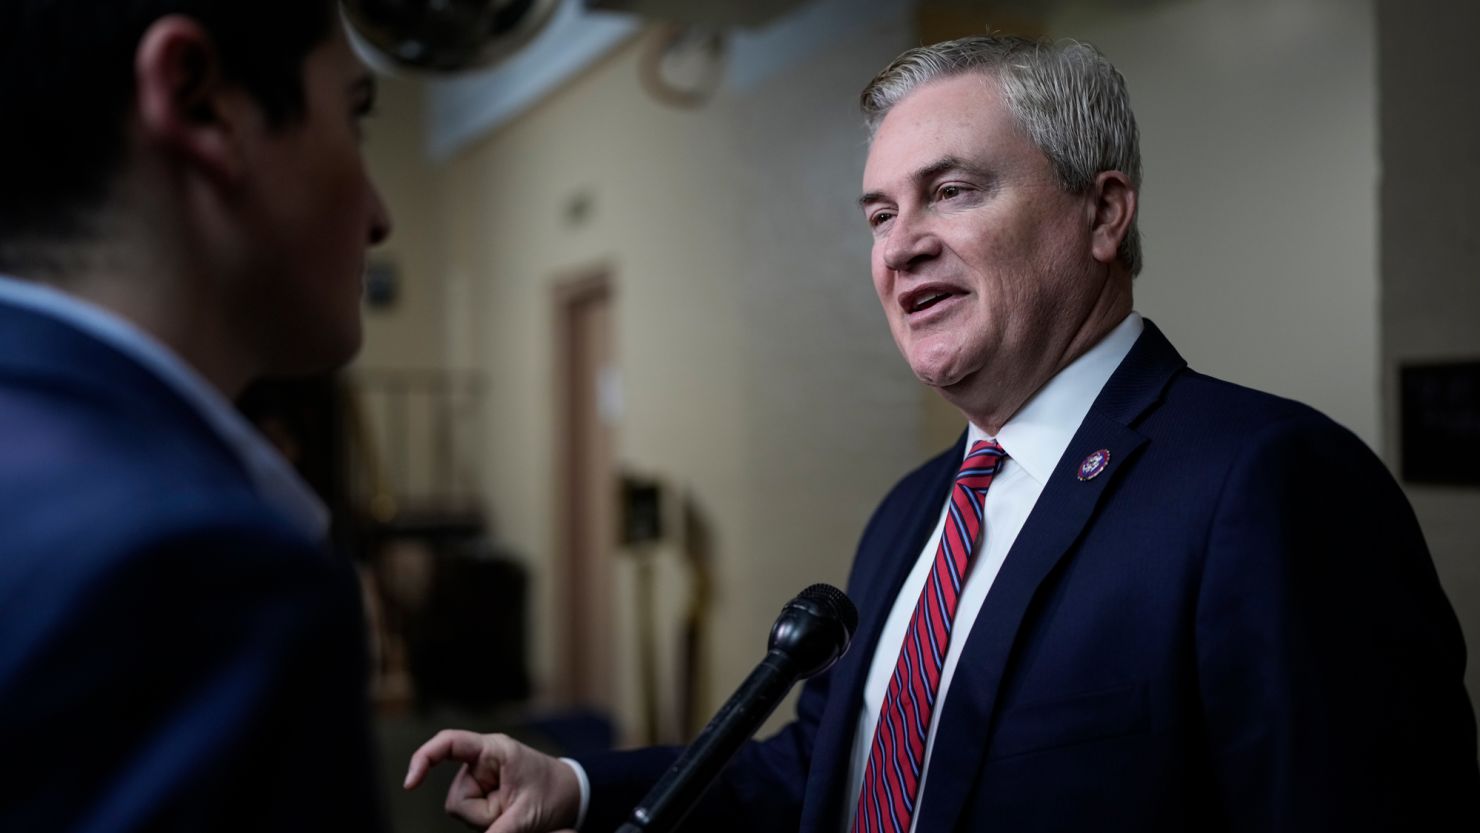 Chairman of the House Oversight Committee Rep. James Comer of Kentucky speaks to reporters on his way to a closed-door GOP caucus meeting at the US Capitol in January 2023 in Washington, DC.